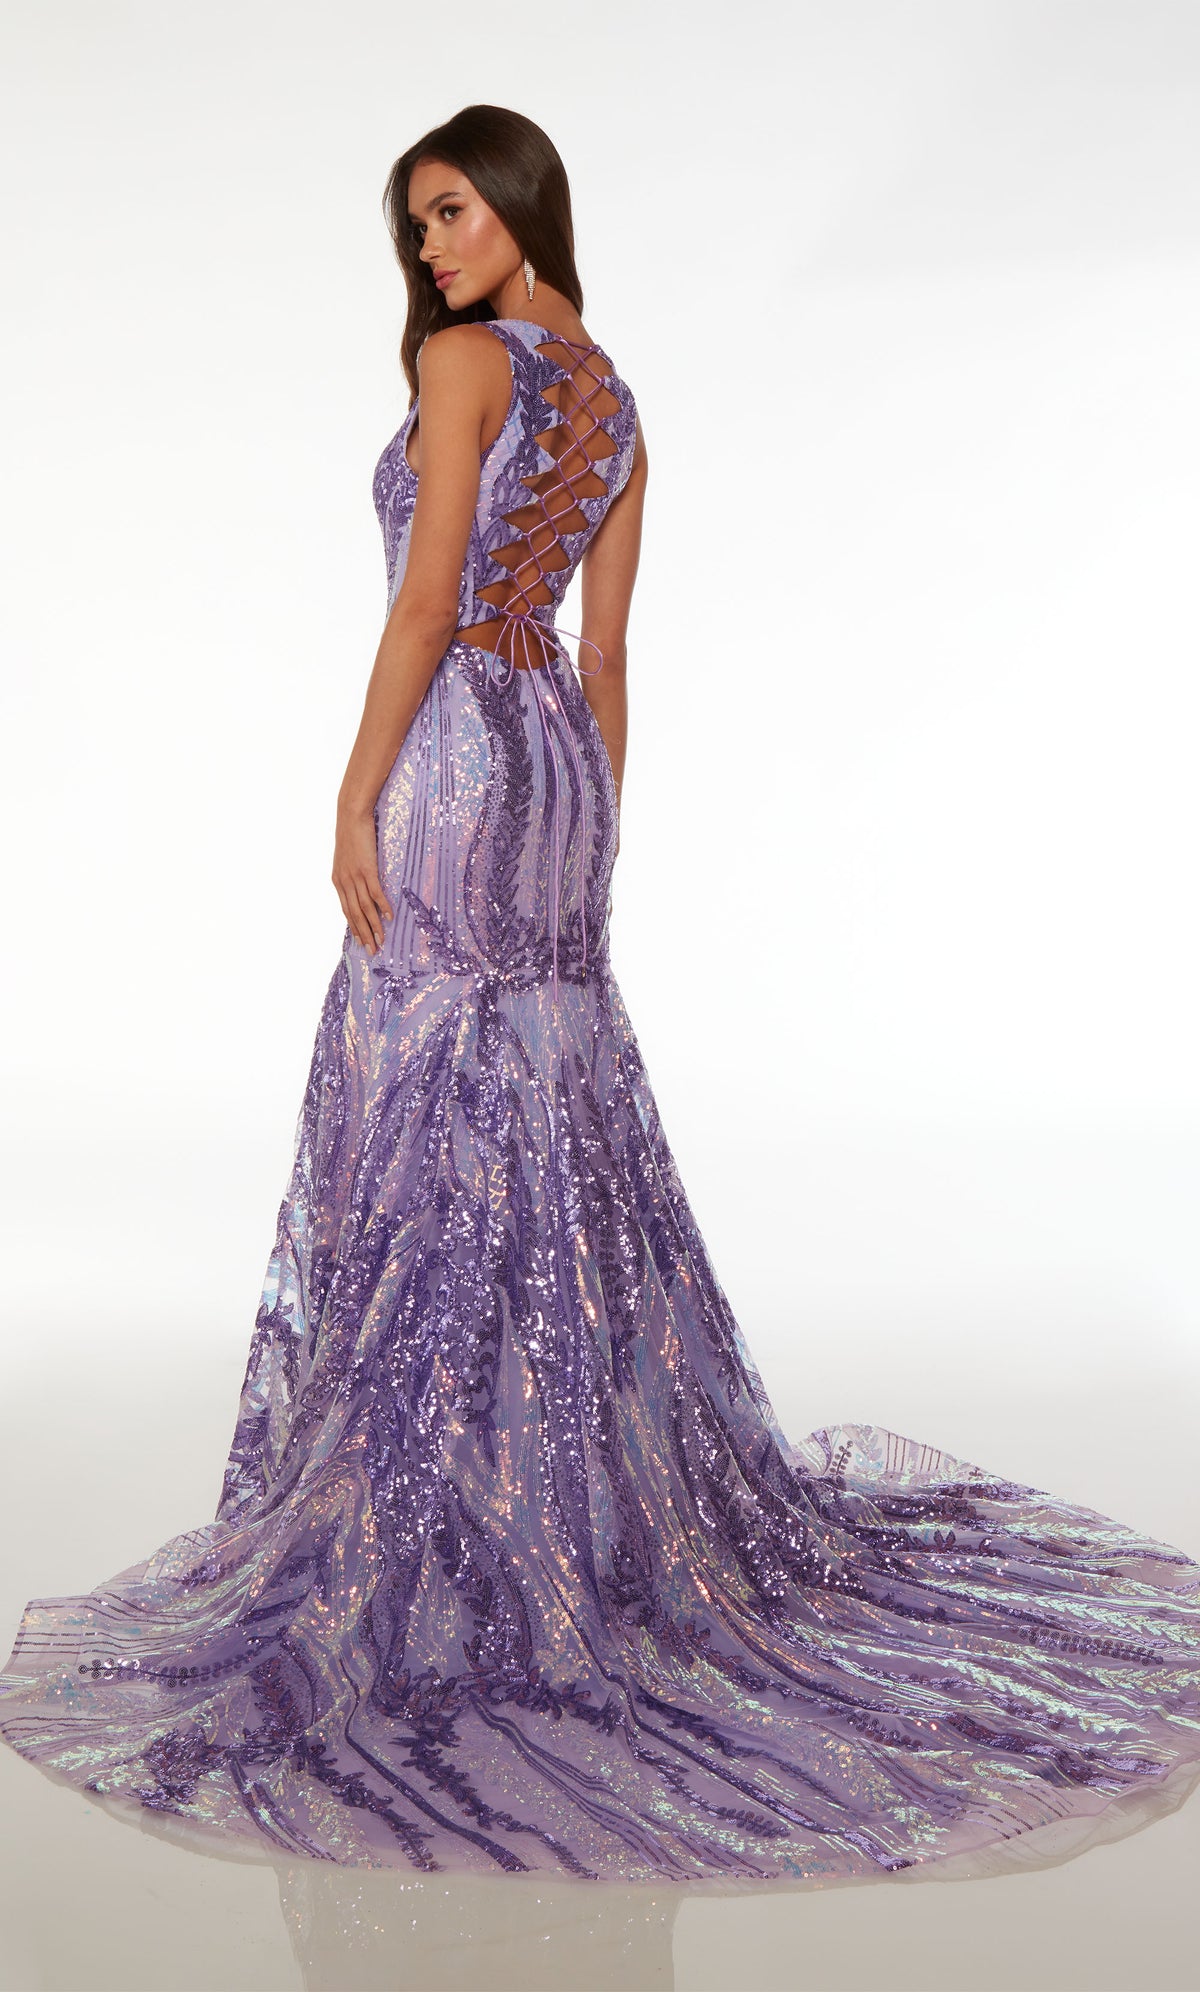 Purple mermaid dress with an plunging neckline, crisscross lace-up back, train, and paisley-patterned iridescent sequin design for an glamorous look.